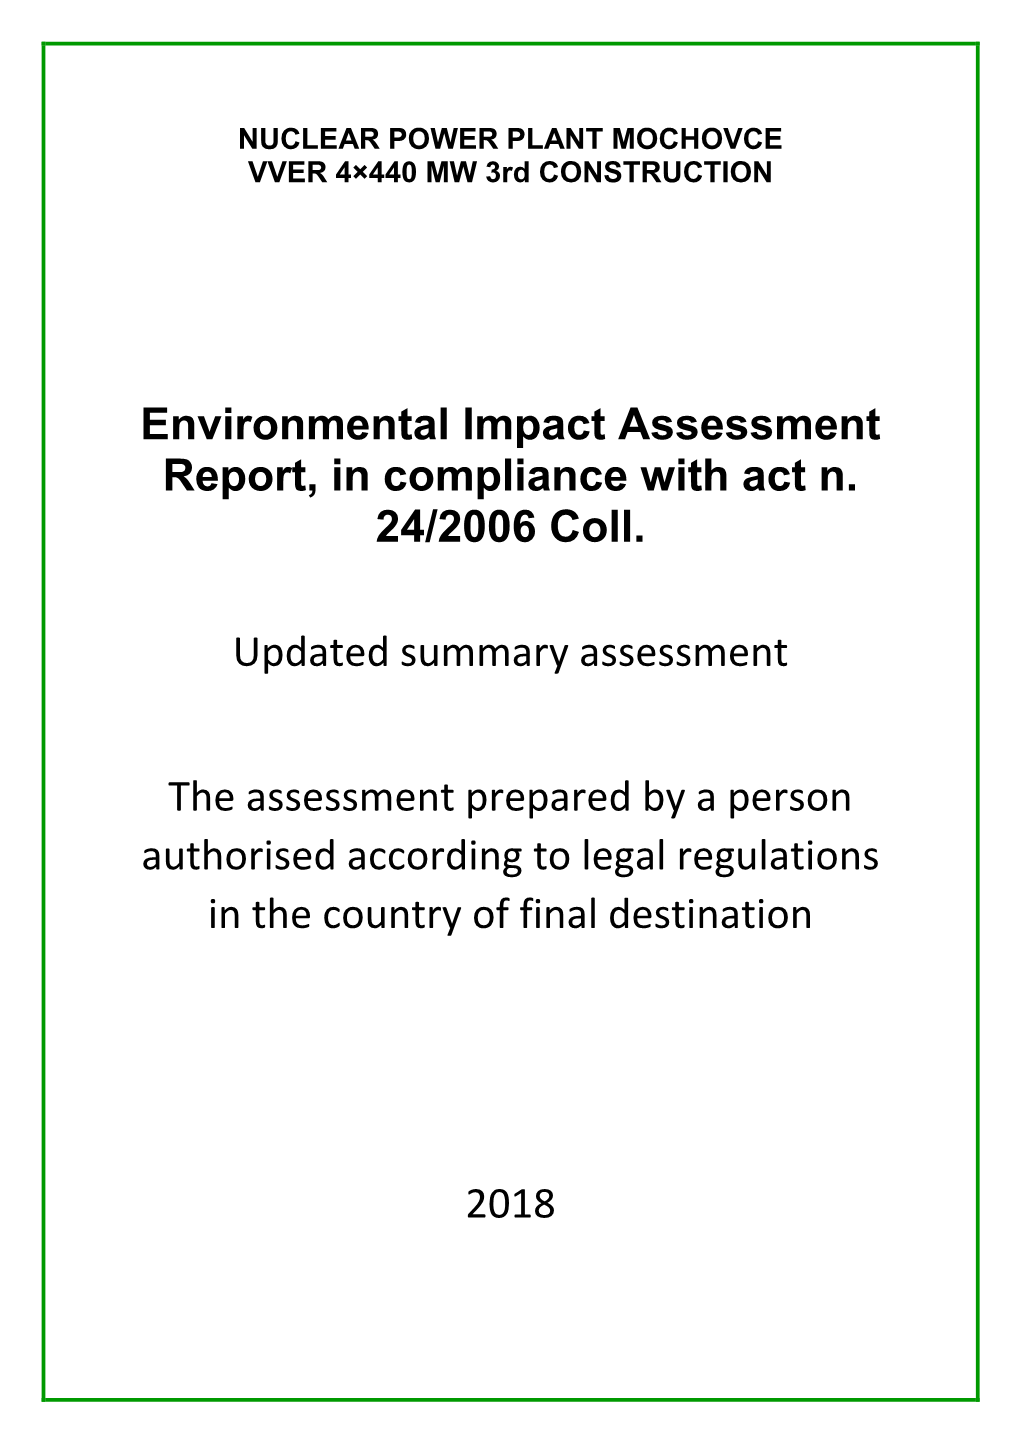 Environmental Impact Assessment Report, in Compliance with Act N. 24/2006 Coll